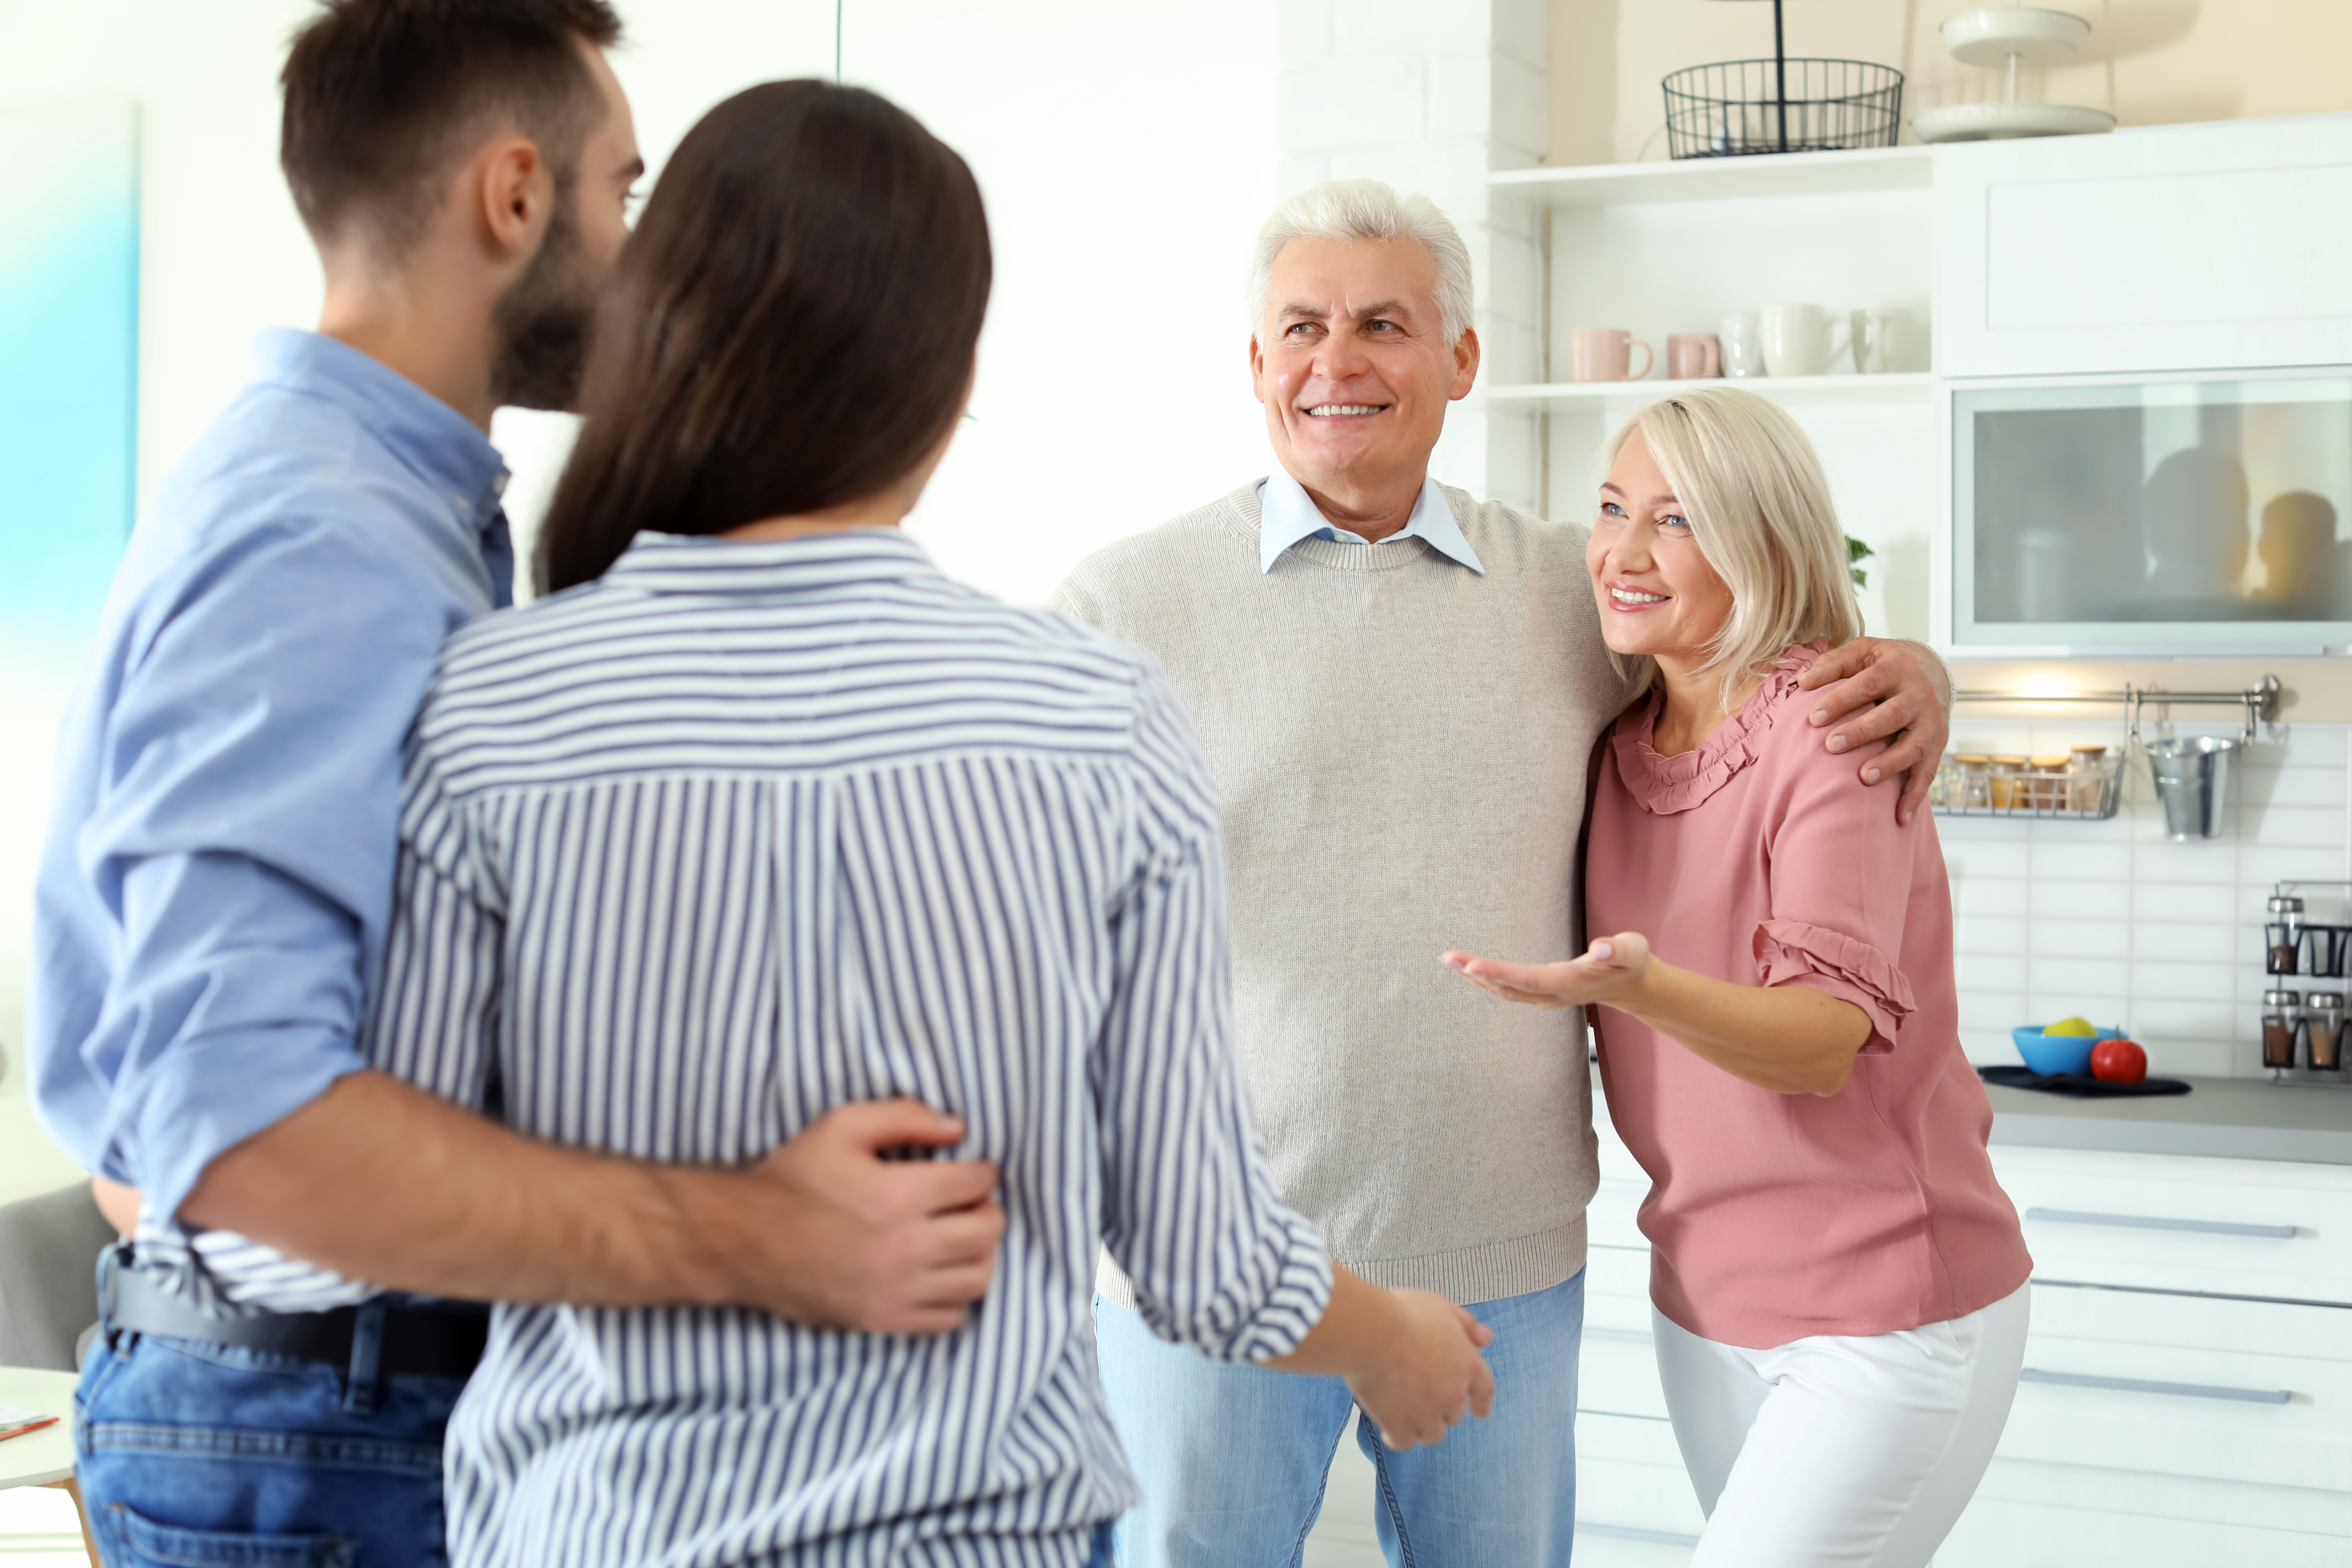 An elderly couple standing in front of a younger couple | Source: Shutterstock